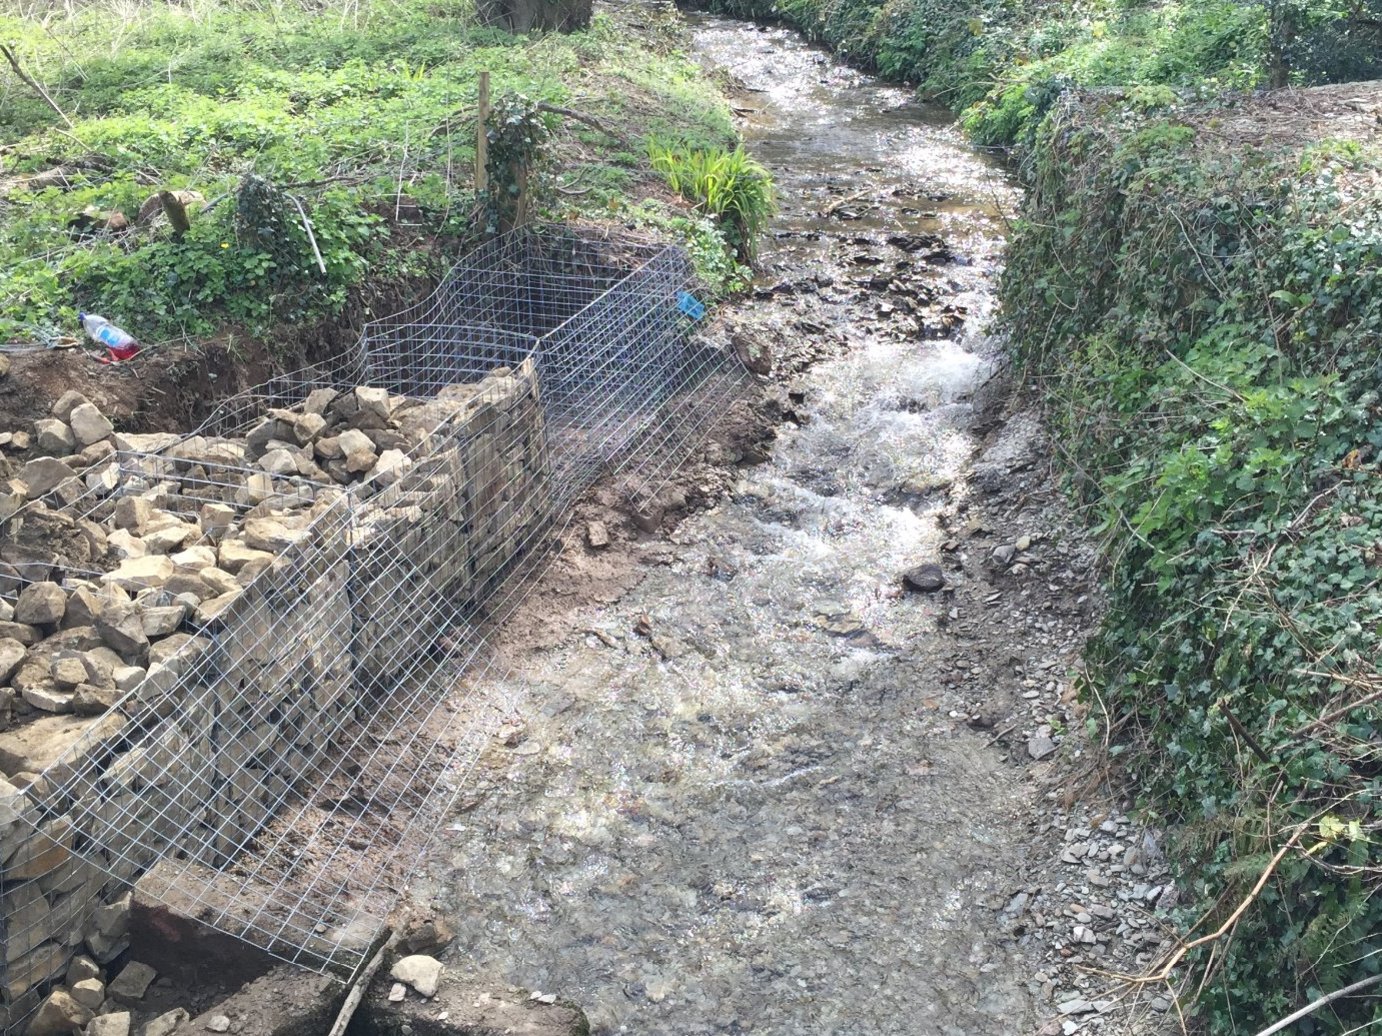 Flood prevention for local North Devon factory required excavation of water course and installation of gabions. Project managed by MJS Building Maintenance Ltd in conjunction with the local Environment Agency.